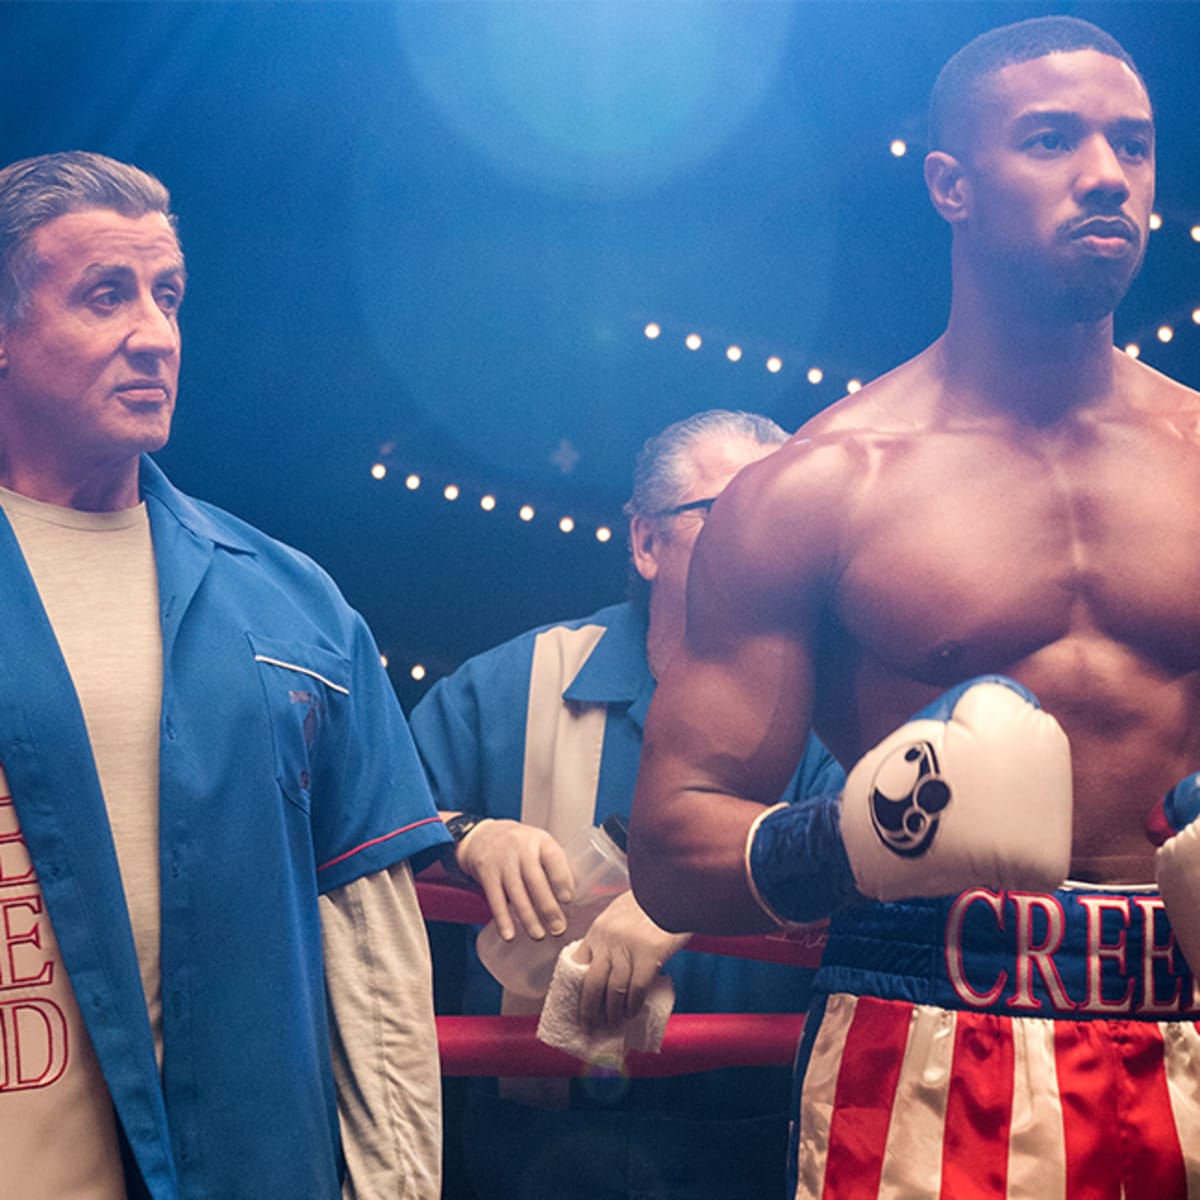 brysomme angreb Stereotype Michael B. Jordan's Trainer Shares 'Creed 2' Shoulders and Chest Workout -  Men's Journal